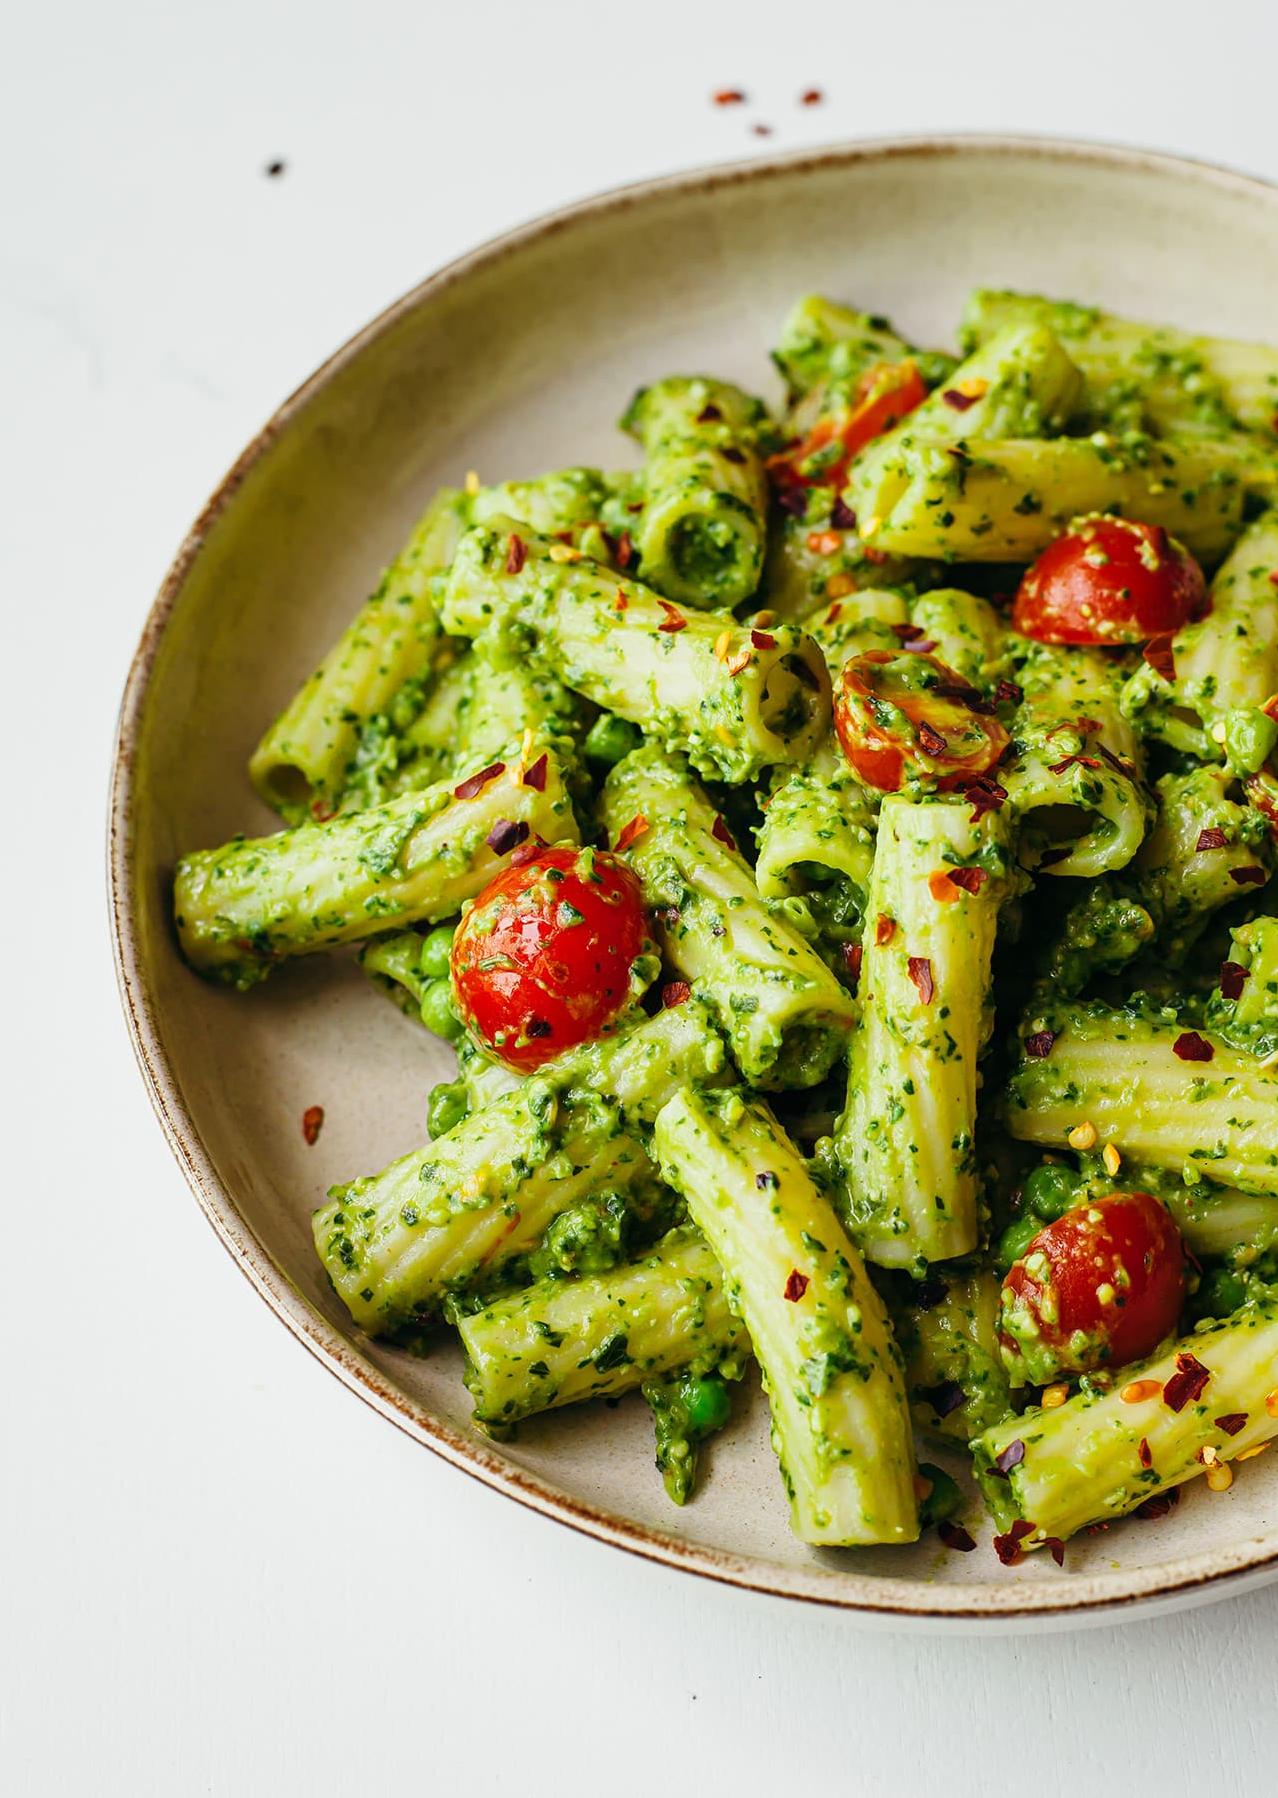  Creamy avocado pesto is the perfect pasta sauce for indulging without the guilt.